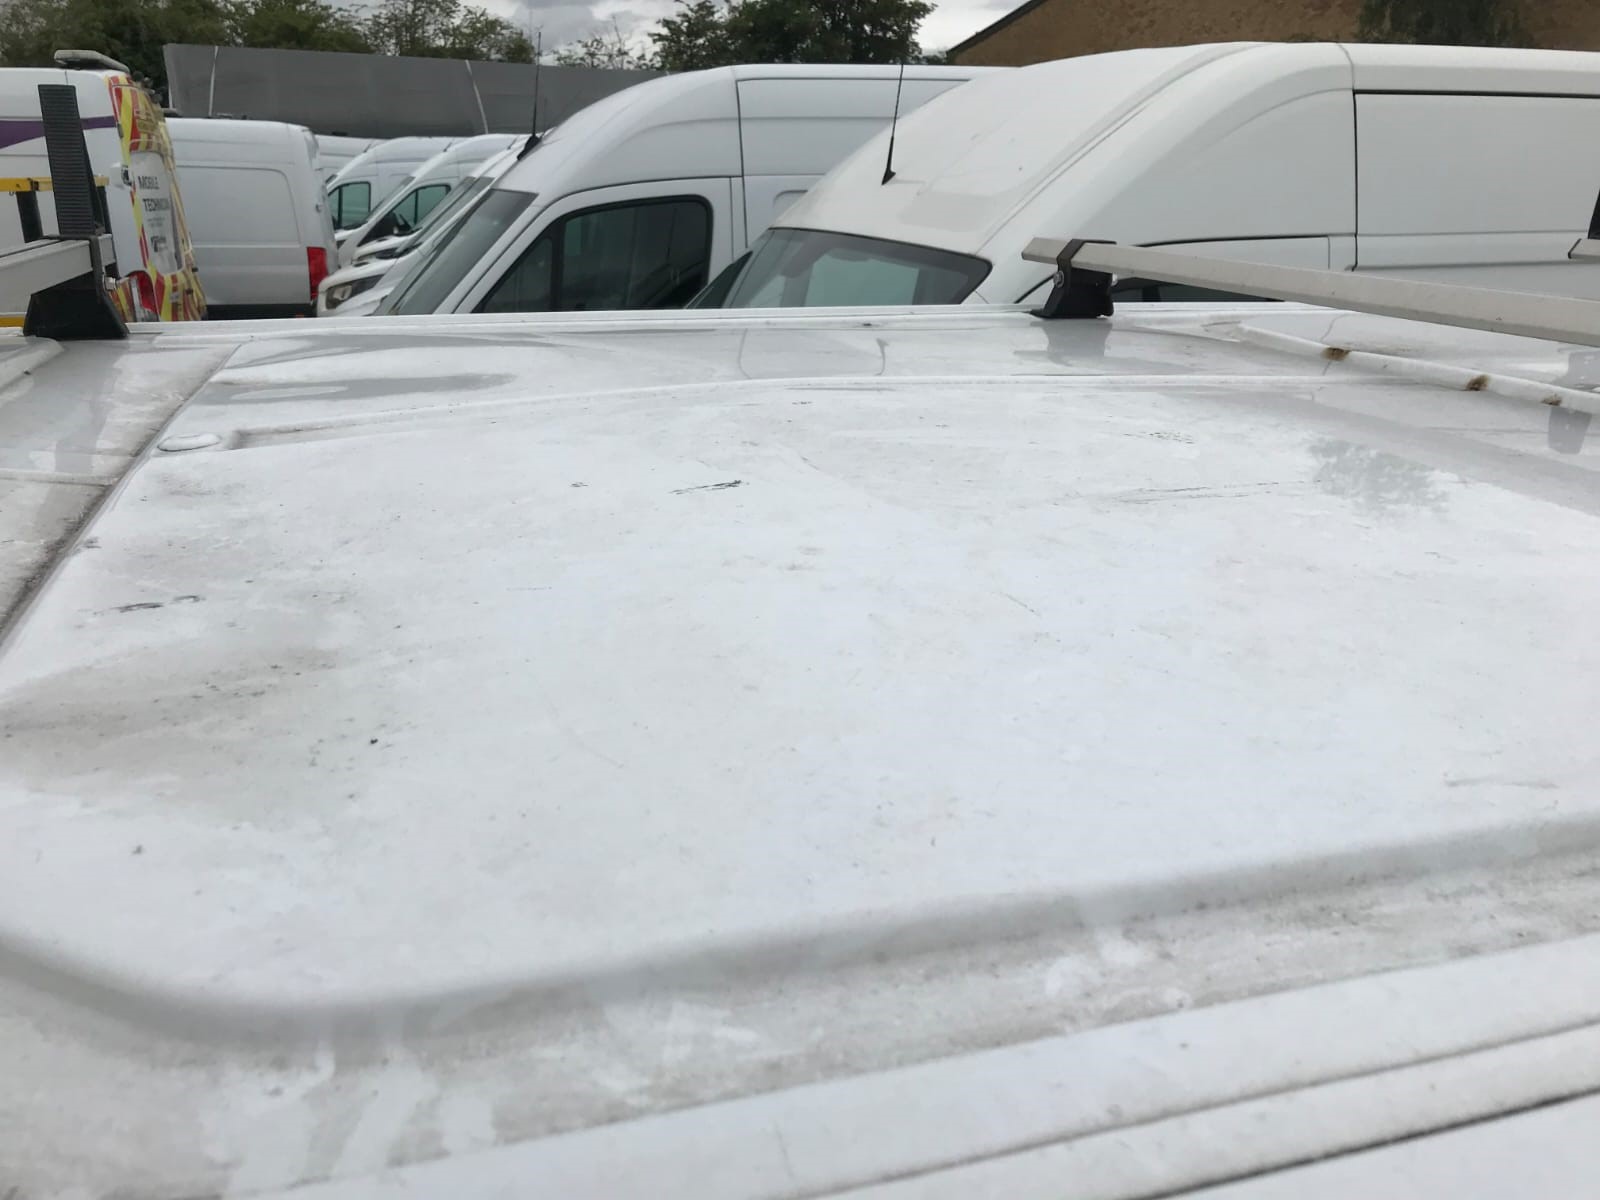 Transit Custom Roof Panel Replacement Case Study